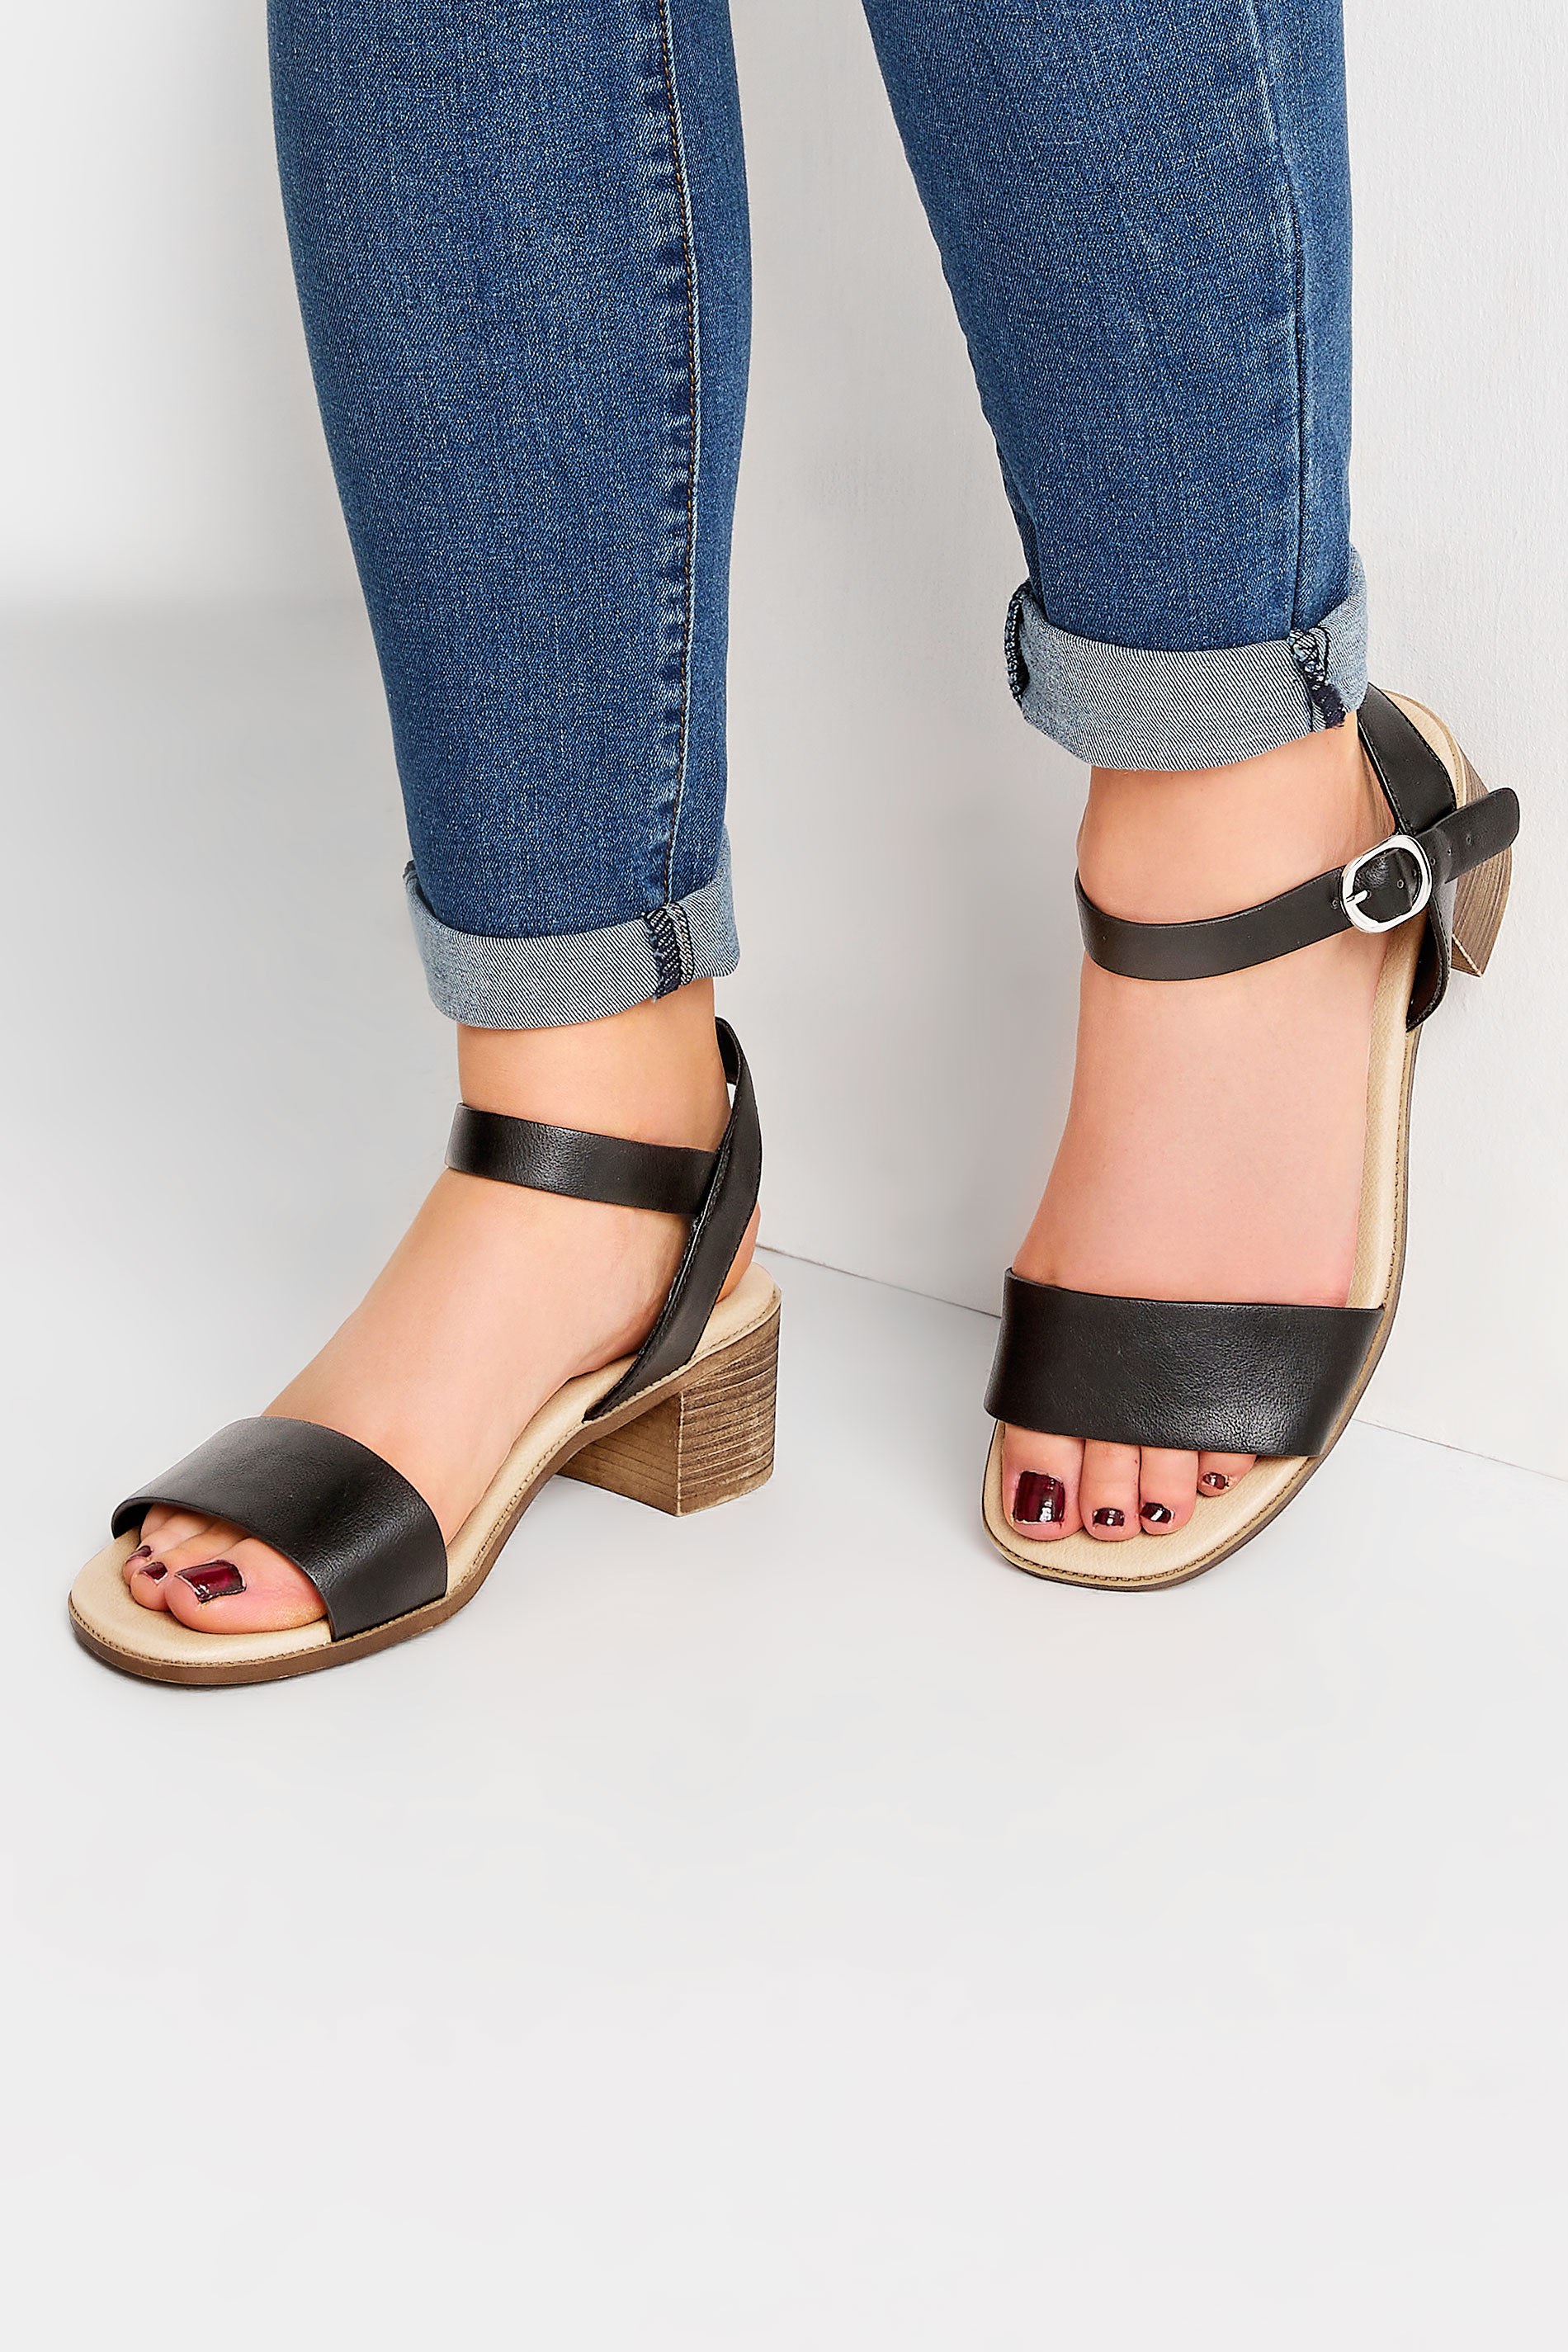 Gladiator Sandal with Zip Back and Buckle Detail | Top Tier Style